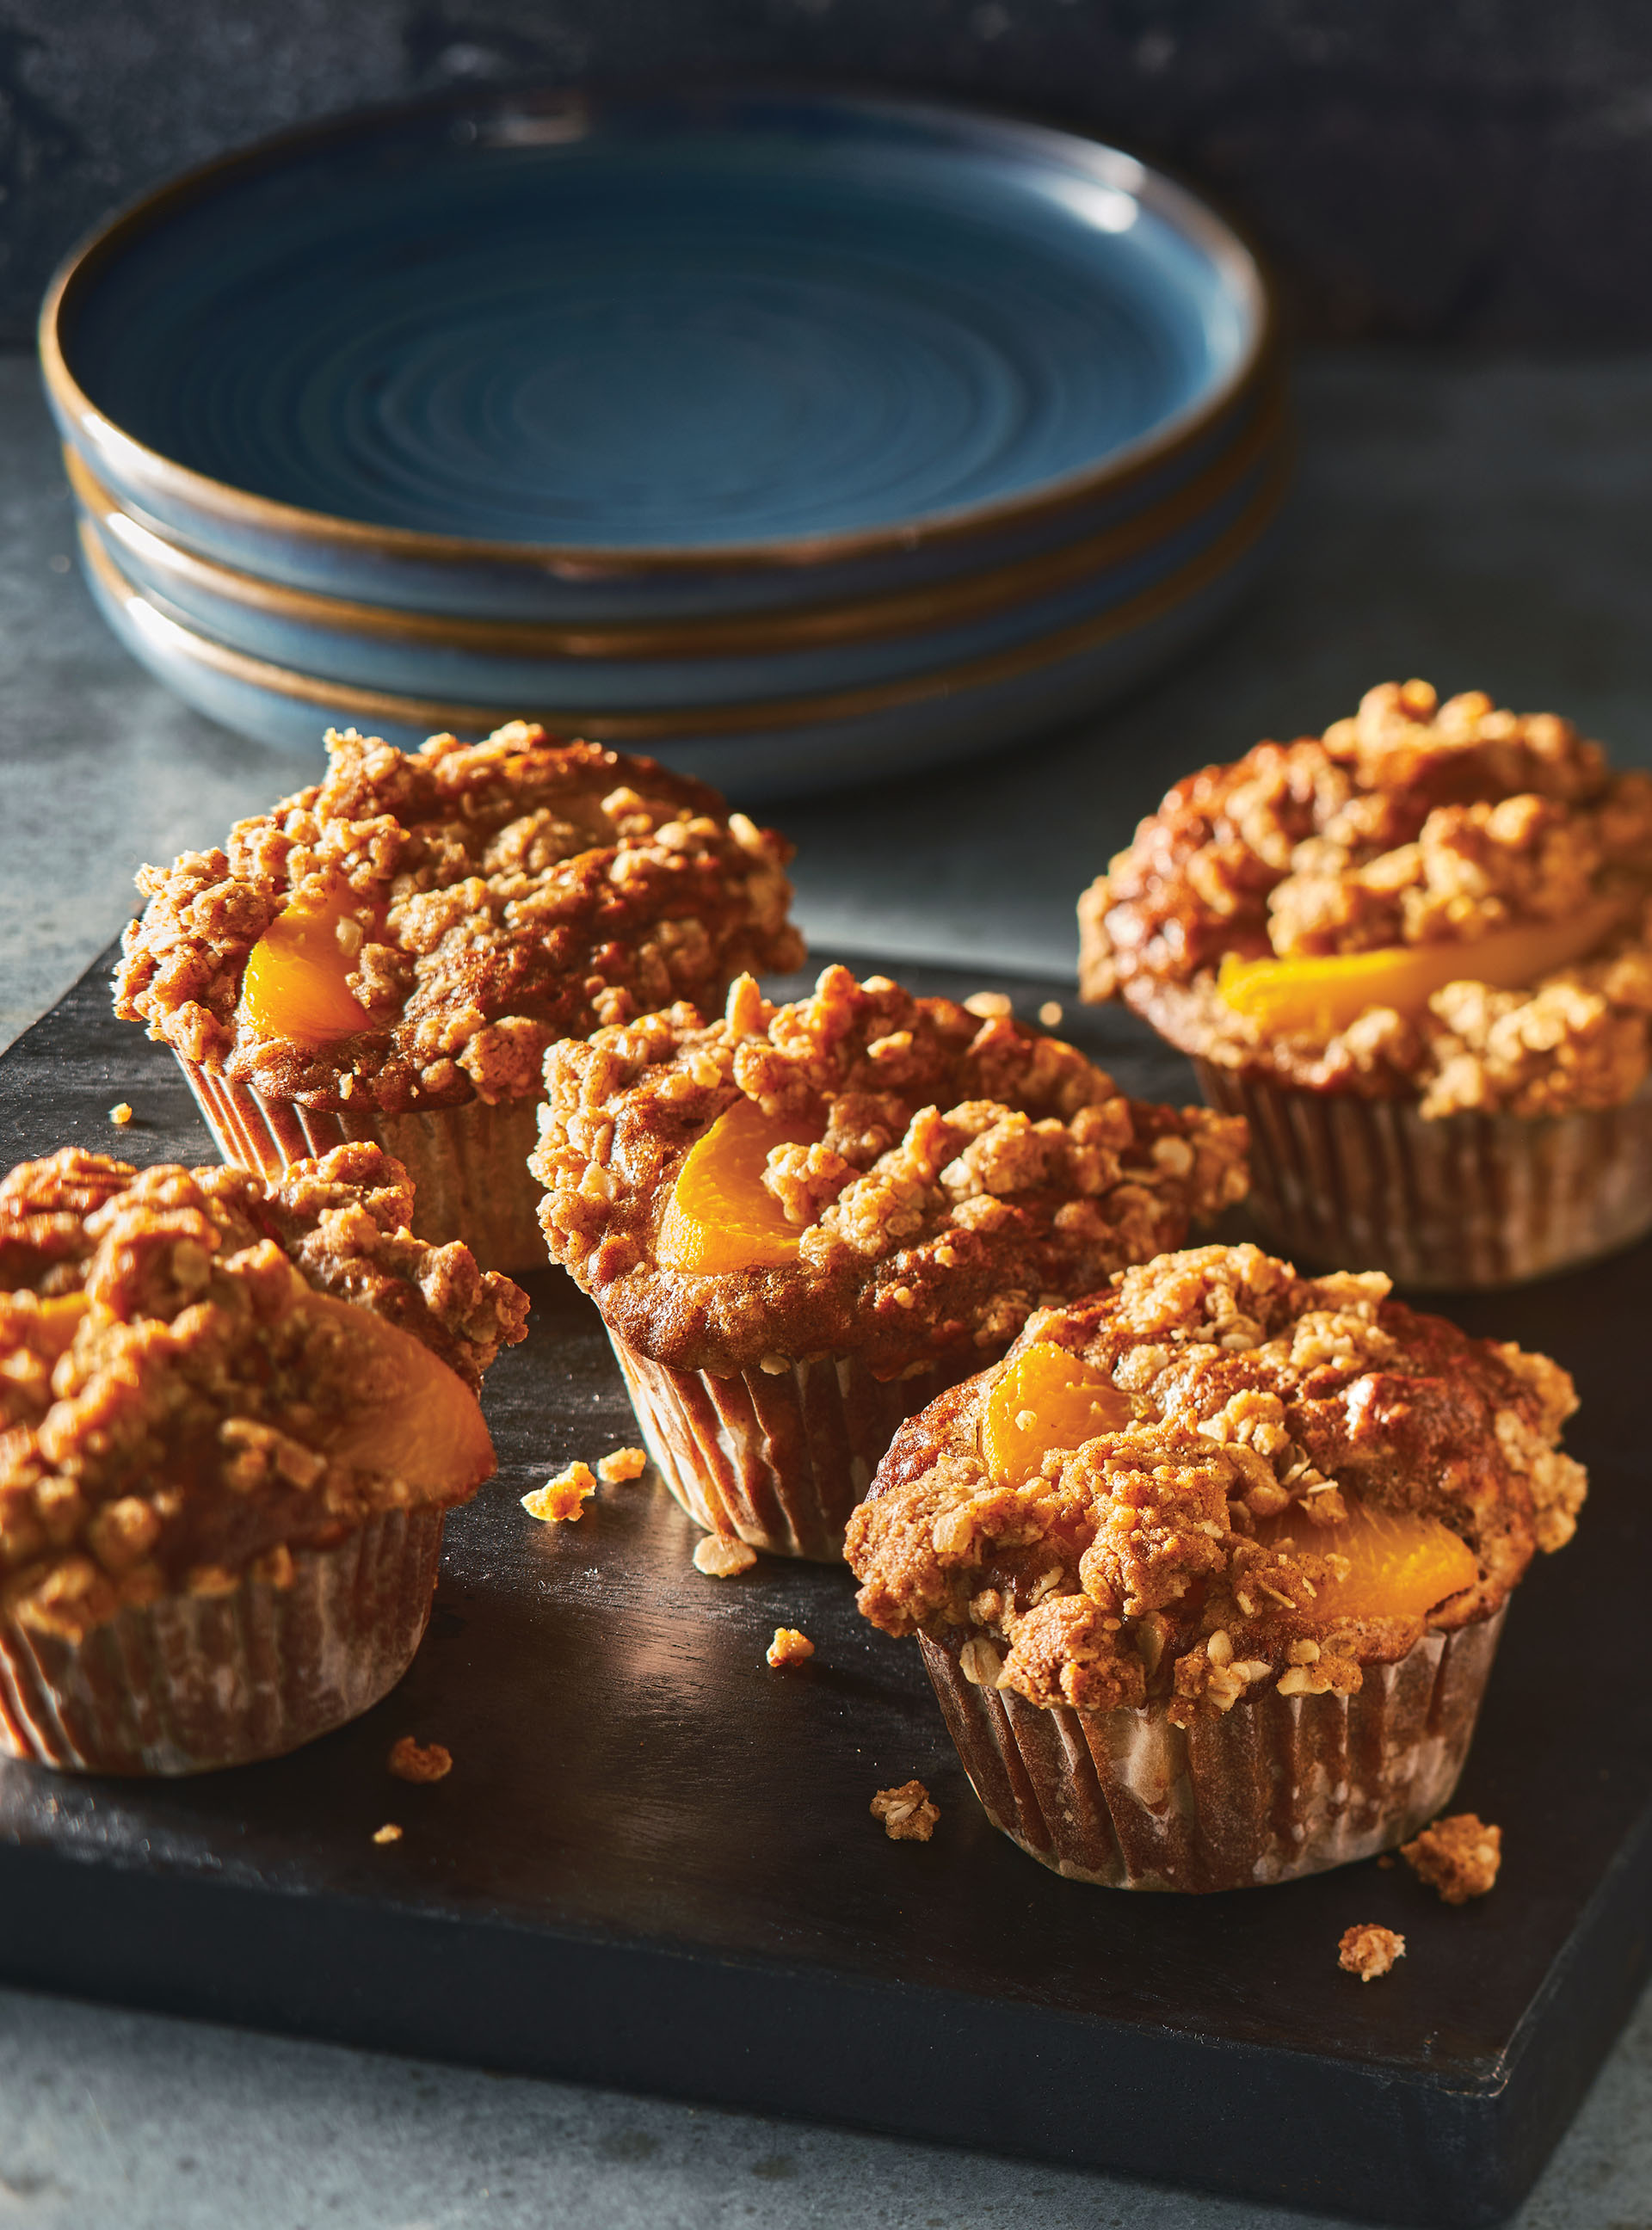 Peach Muffins with Cinnamon Crumble